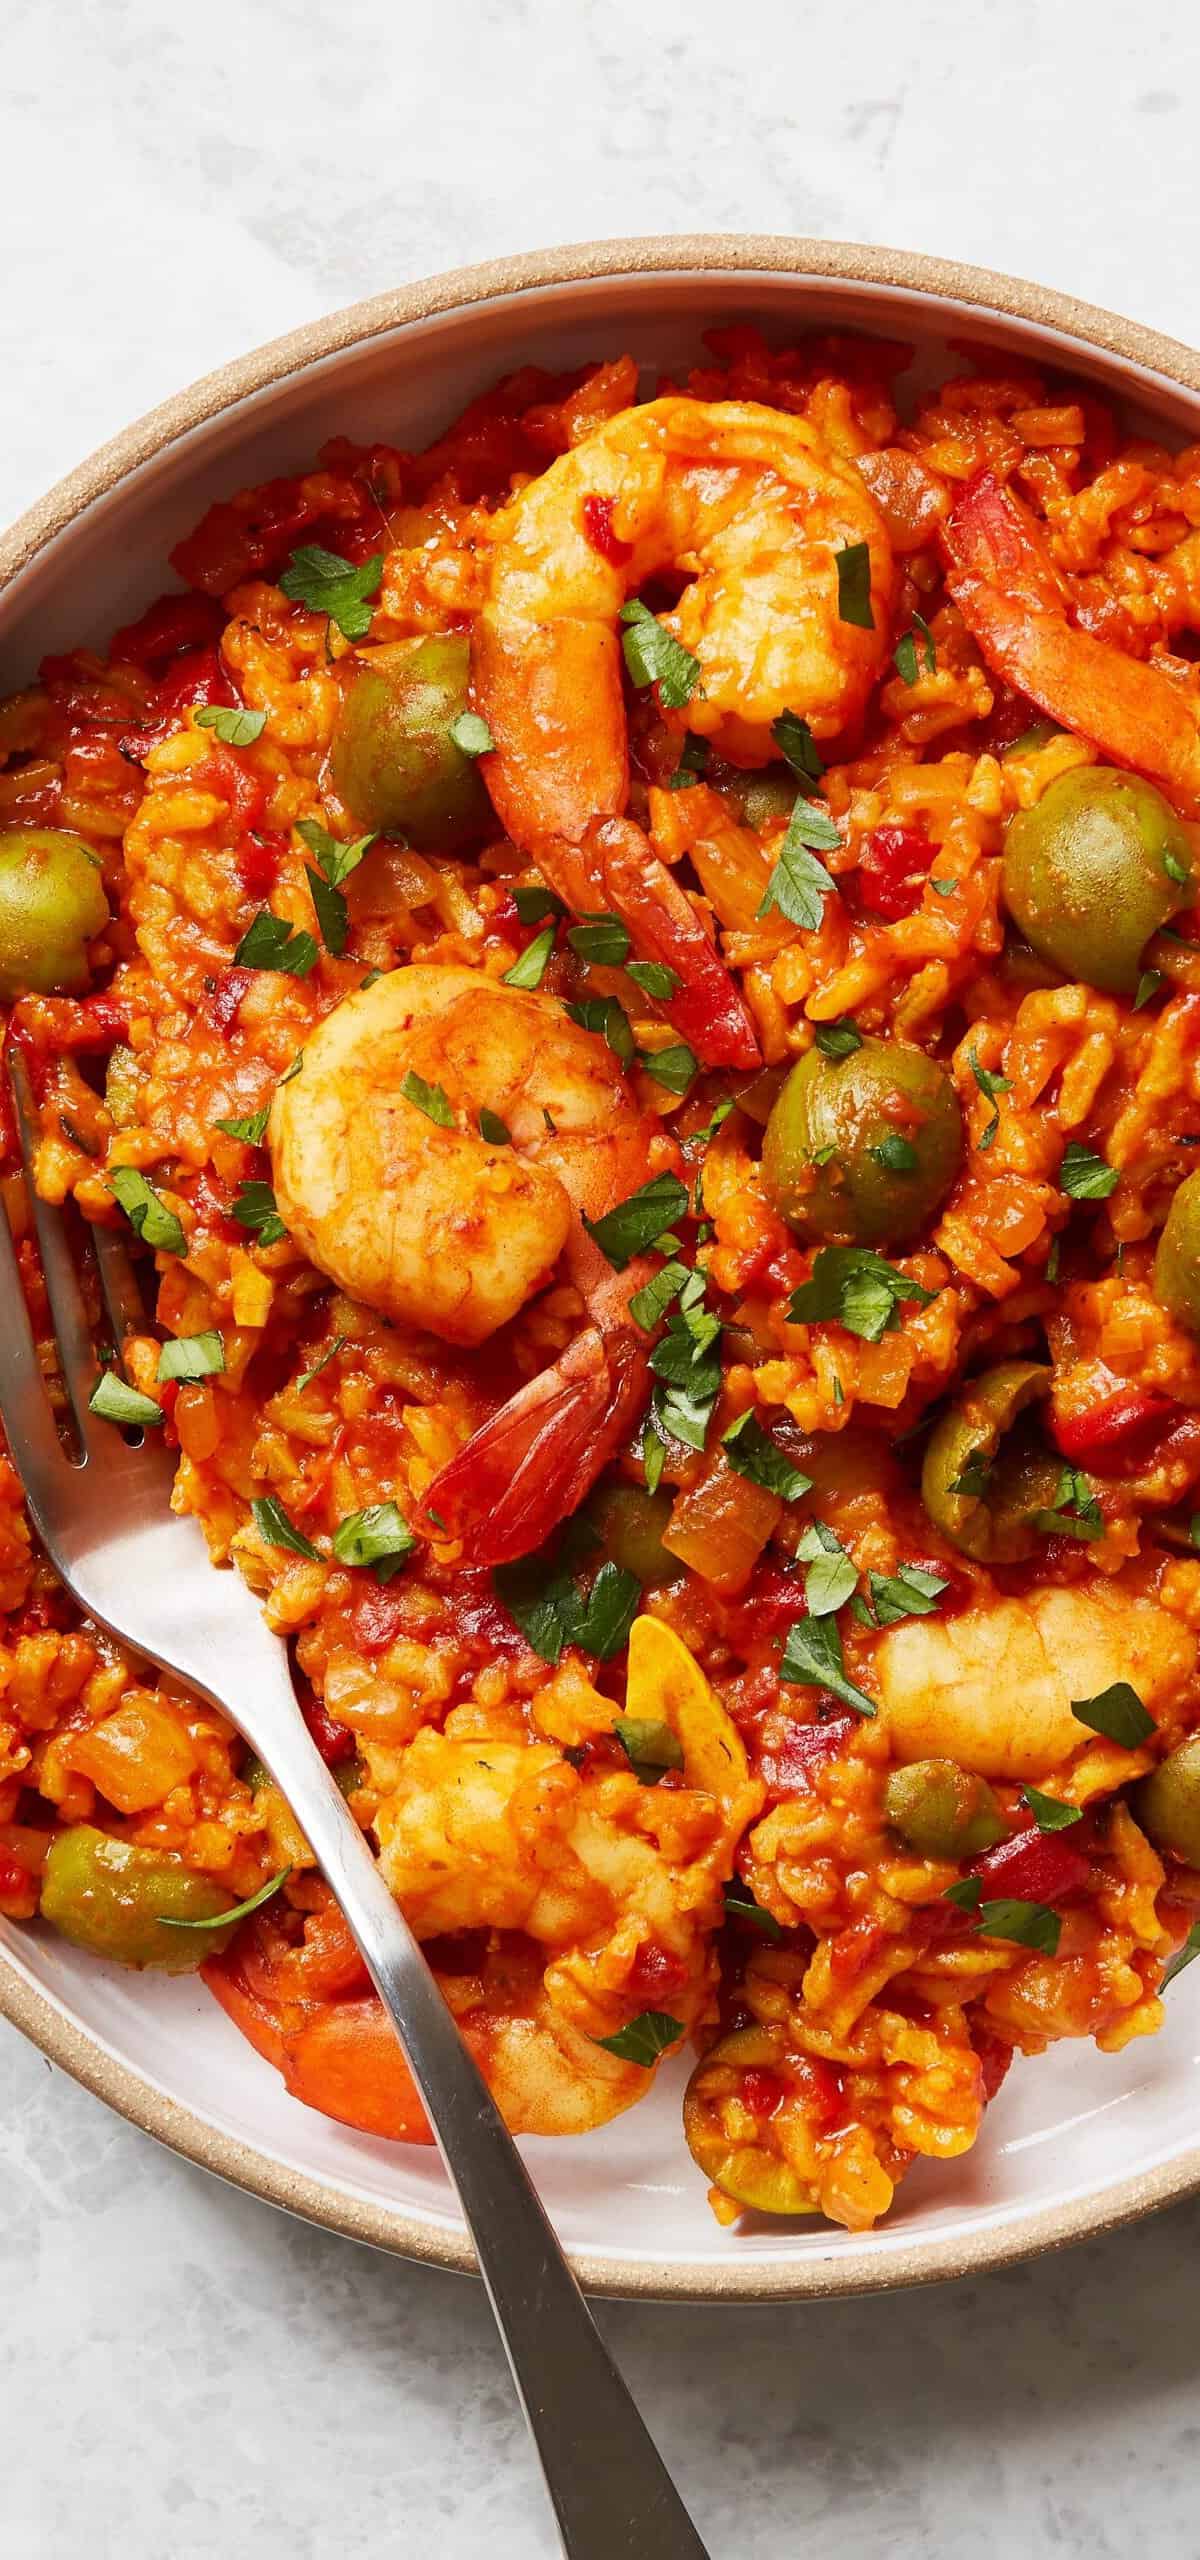  Each bite is bursting with juicy shrimp and tangy tomato sauce.